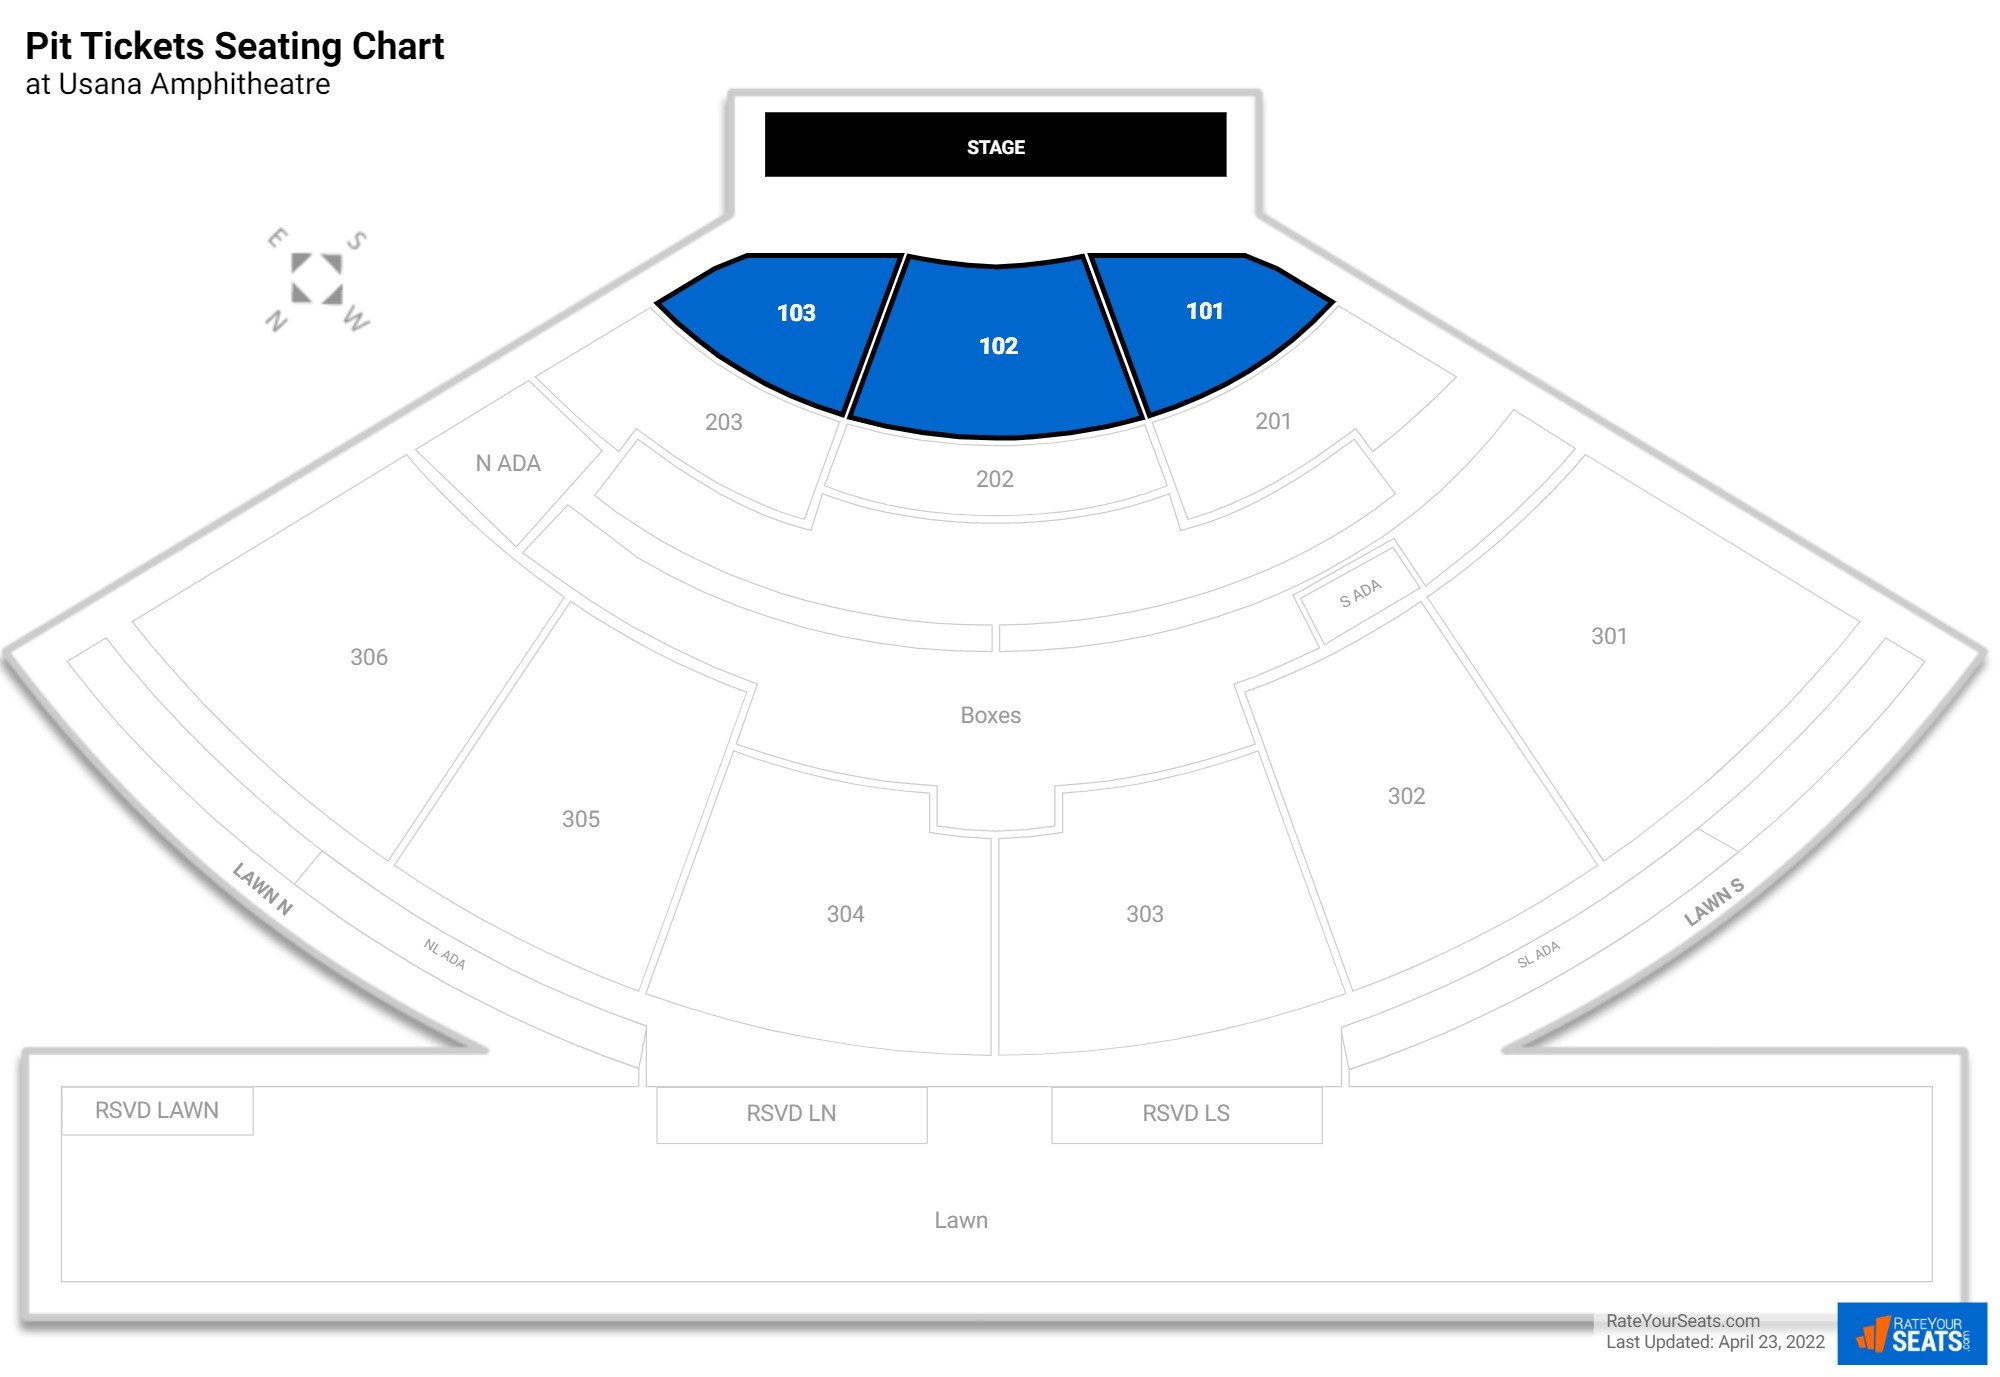 Concert Pit Tickets Seating Chart at Usana Amphitheatre